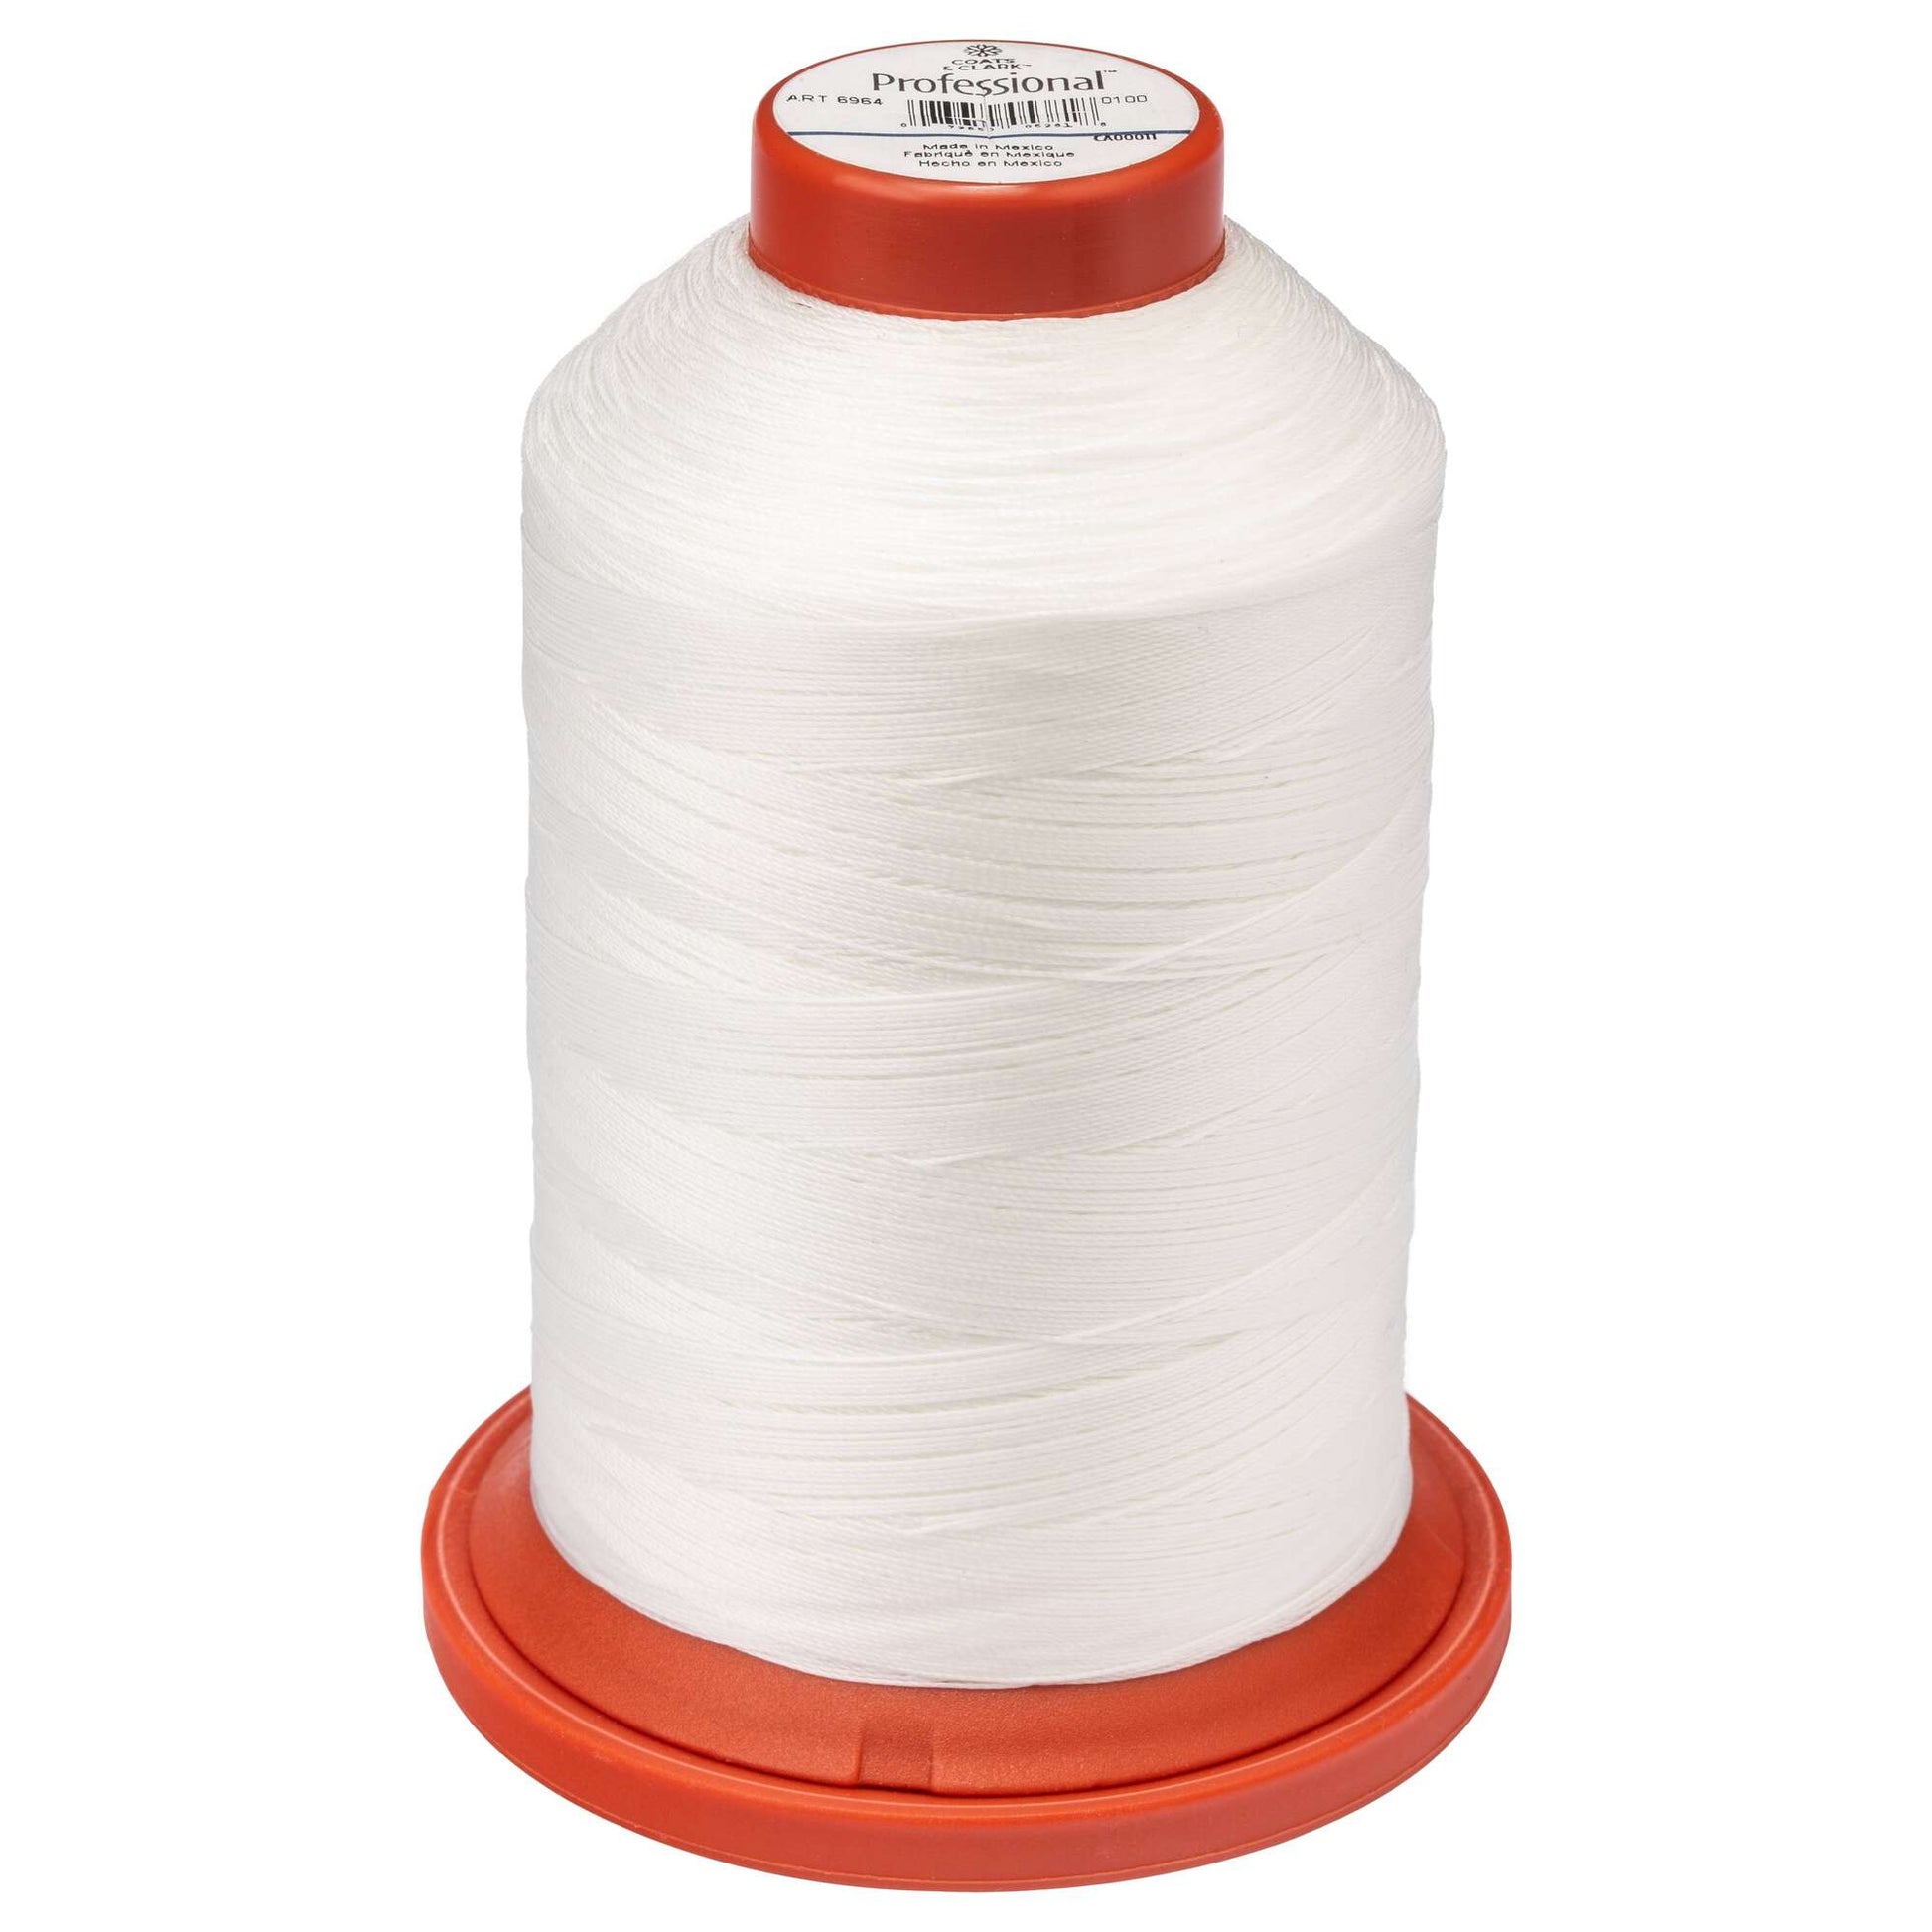 Coats Professional Upholstery Thread 1500yd Natural